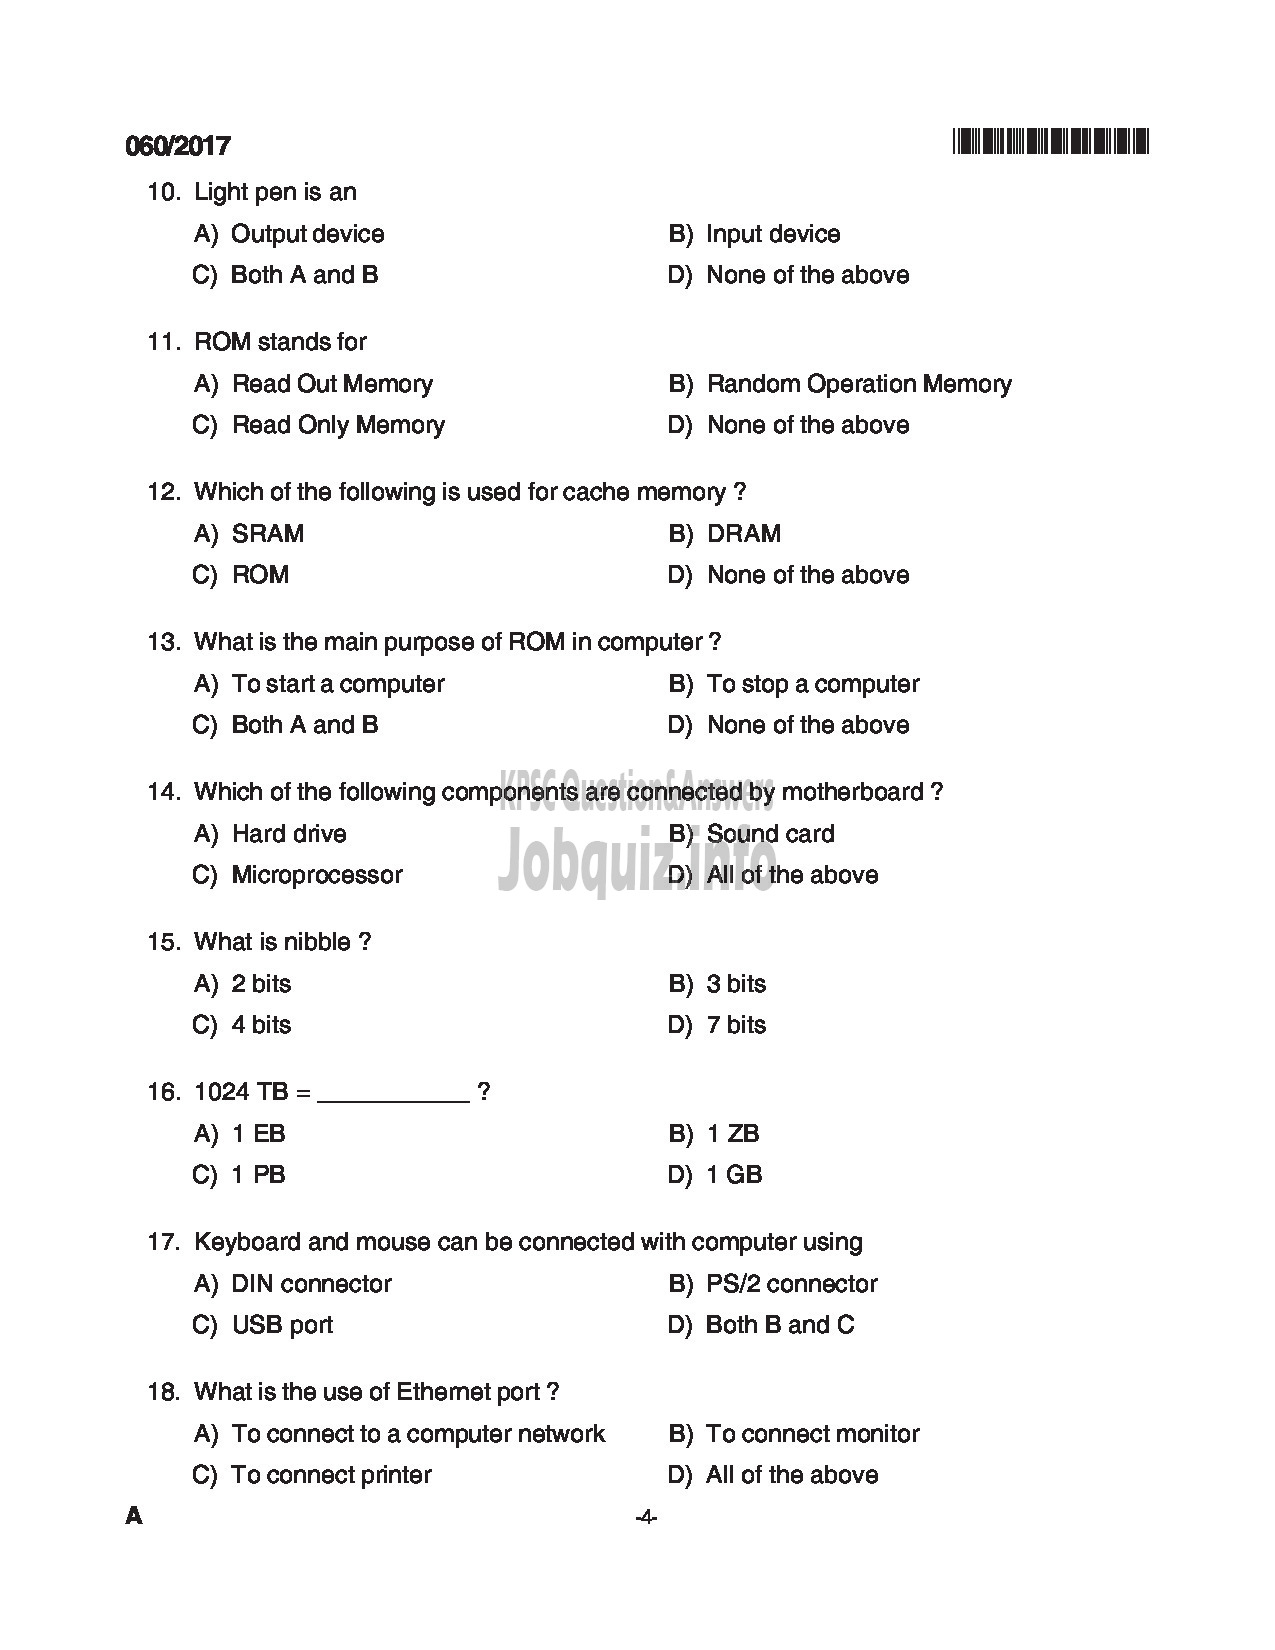 Kerala PSC Question Paper - TRADESMAN COMPUTER ENGINEERING TECHNICAL EDUCATION QUESTION PAPER-4